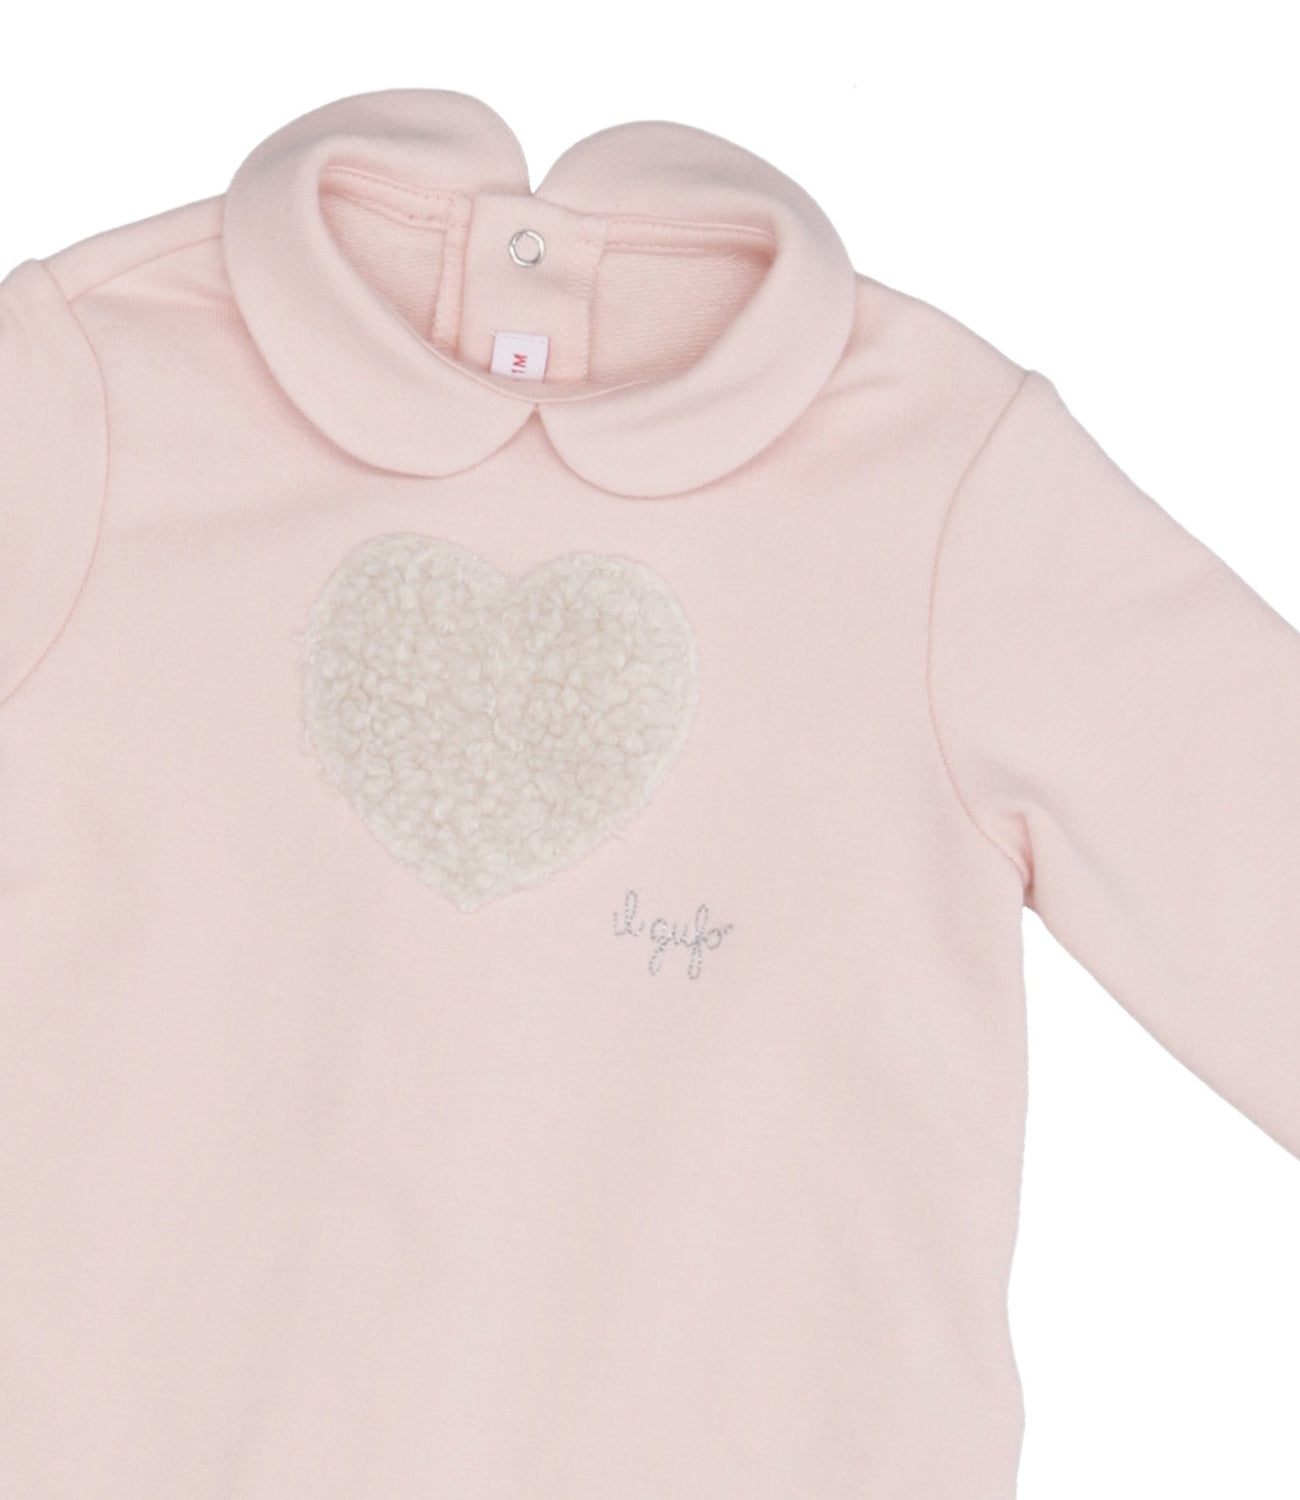 The Owl | Pink and Cream Sleepsuit